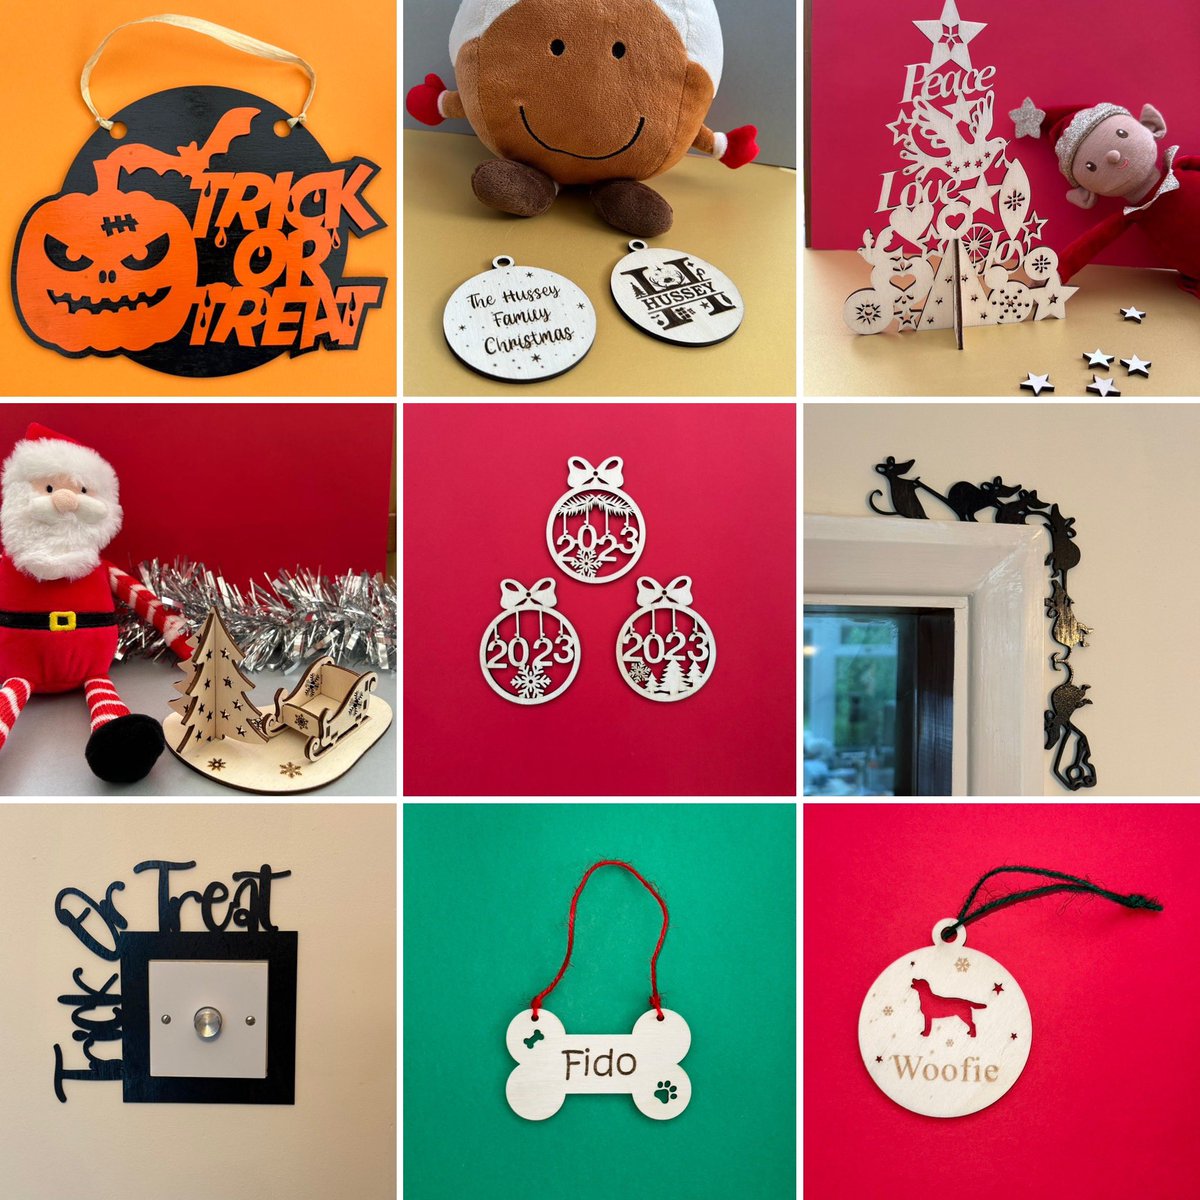 @MHHSBD Hi everyone, we’re Pig & Ted and we do lots of laser cut wooden decorations from table confetti, personalised Christmas baubles to Halloween decorations. We also do knitted baby wear 😊 Check out our shop: pigandted.etsy.com #MHHSBD #EtsySeller